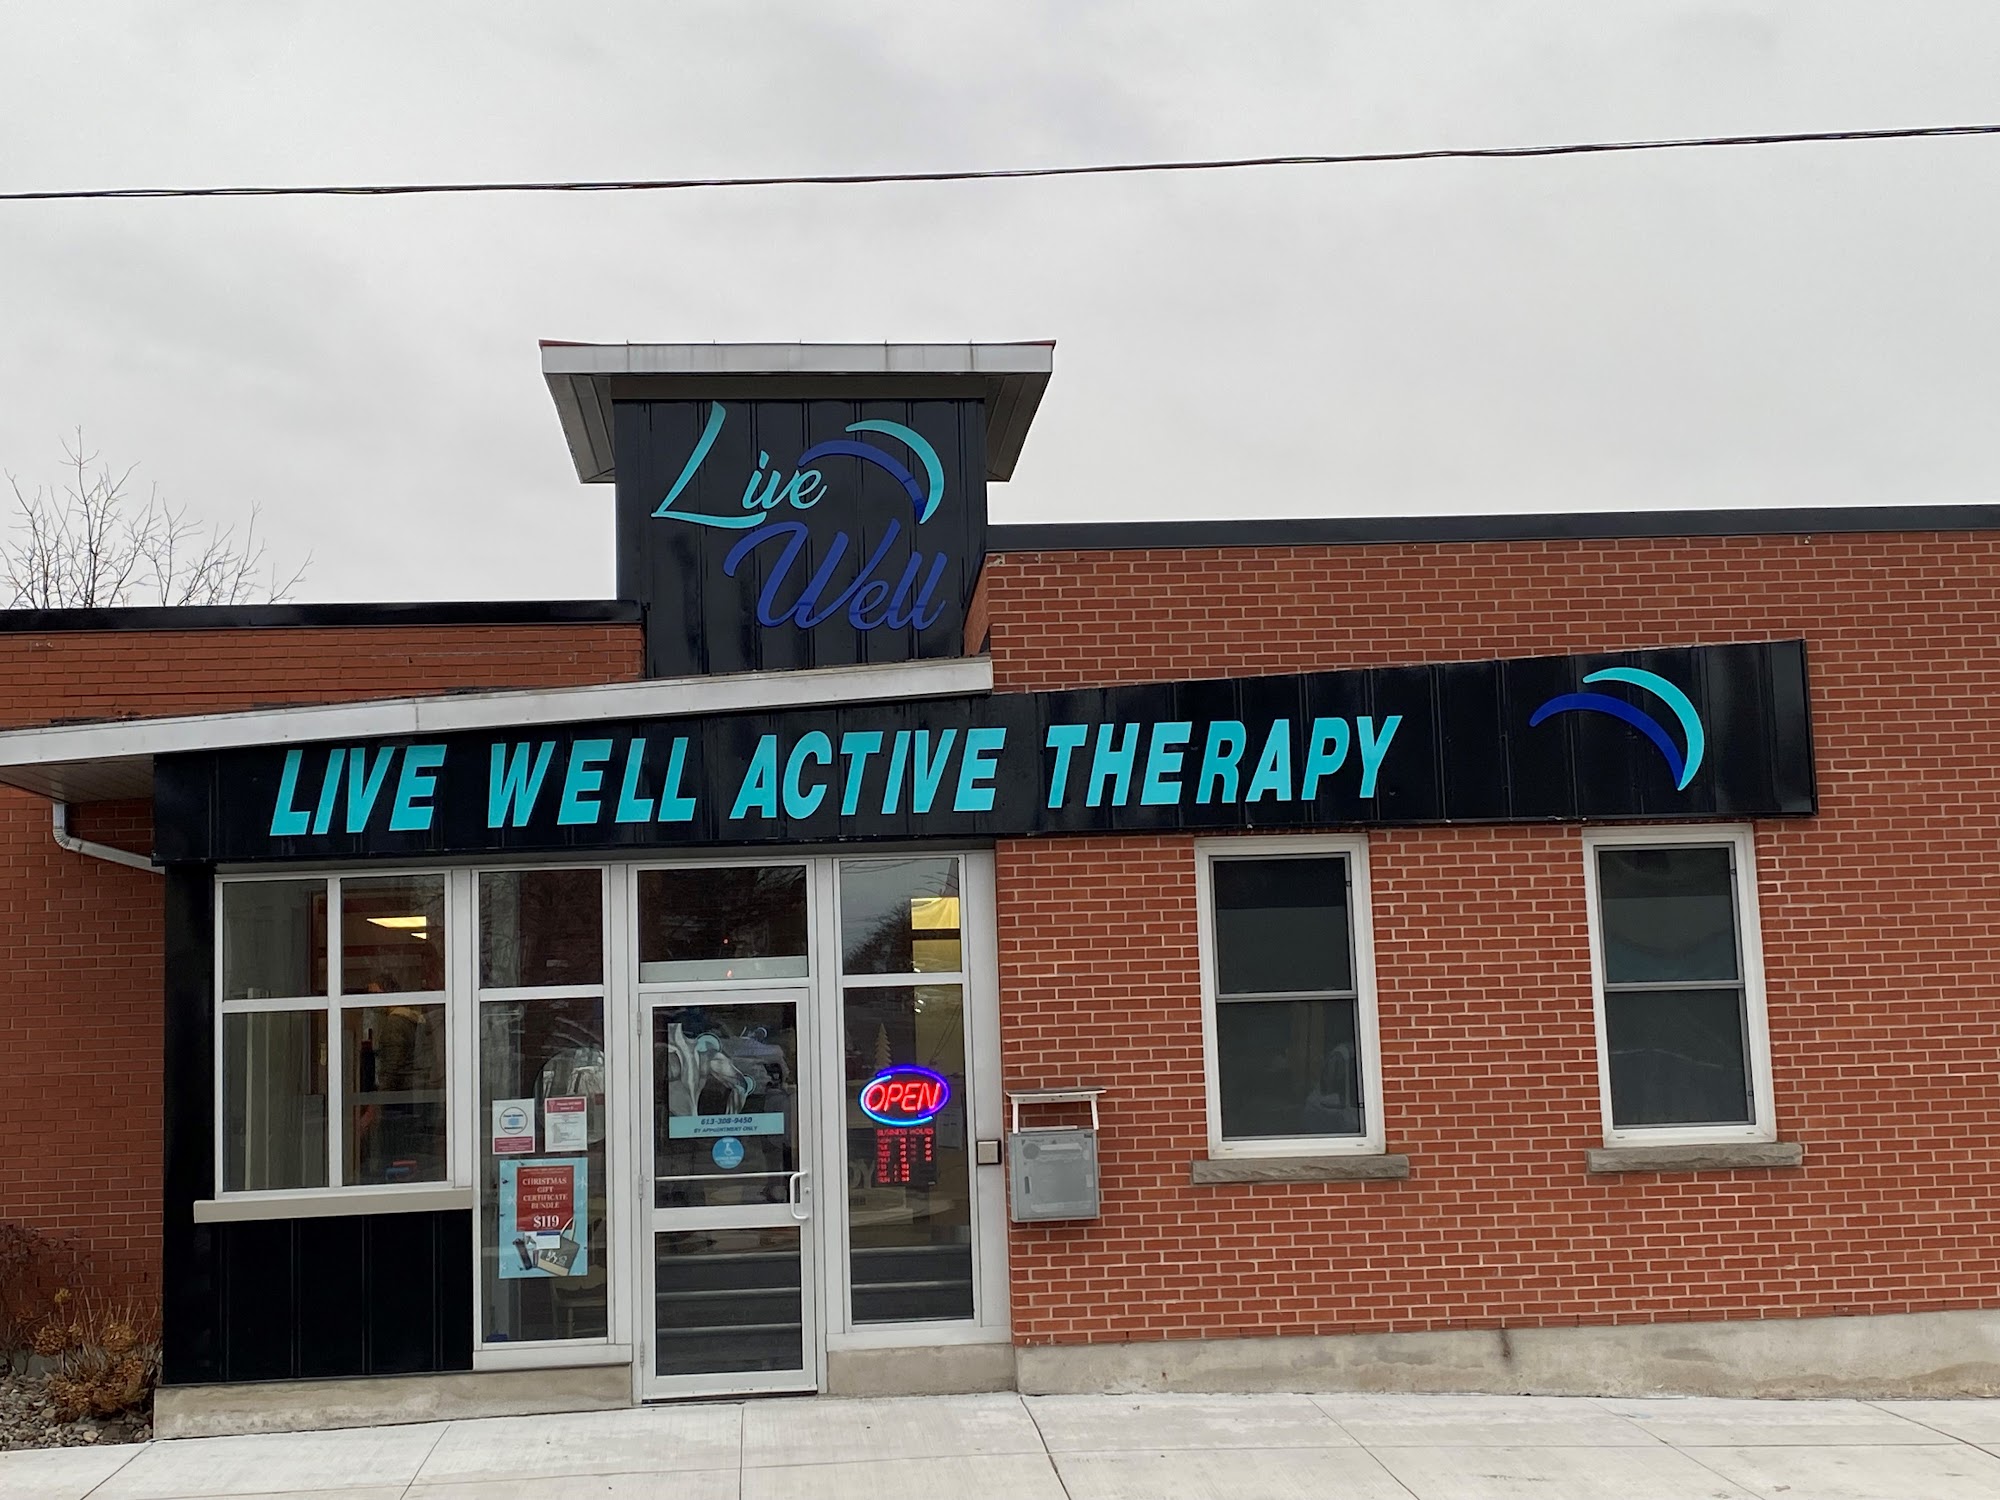 Live Well Active Therapy 32 Mill St E, Napanee Ontario K7R 1H2